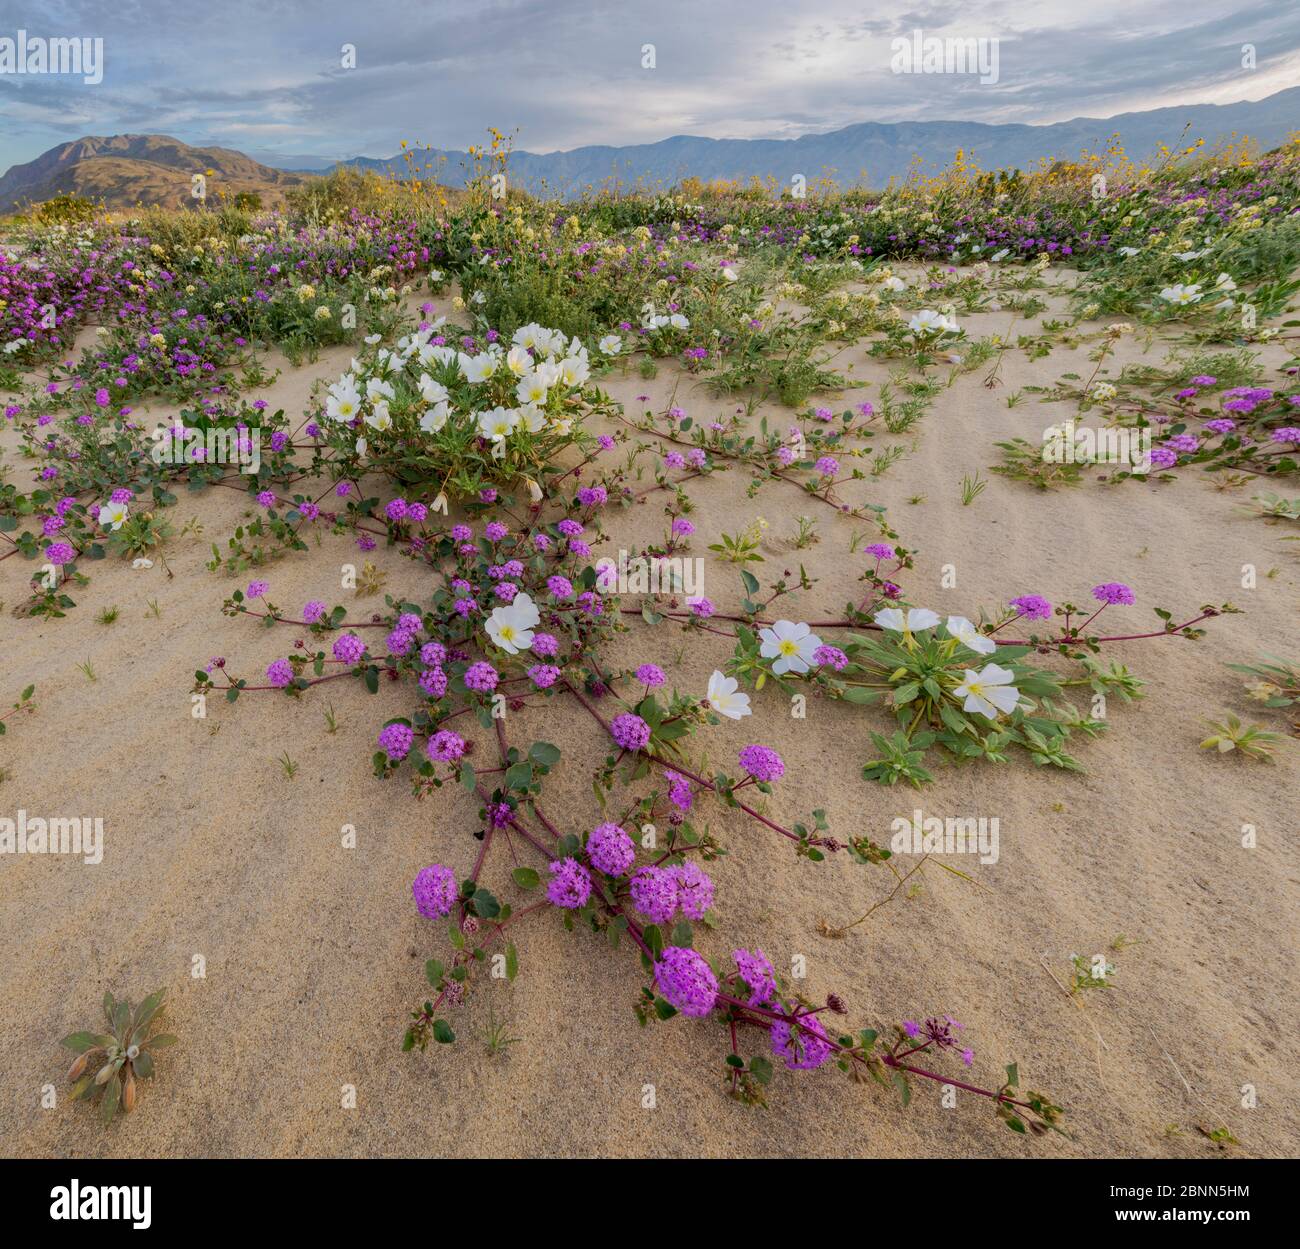 Desert landscape with flowering Sand verbena (Abronia), Desert gold (Geraea canescens), and Birdcage evening primrose (Oenothera deltoides), with the Stock Photo